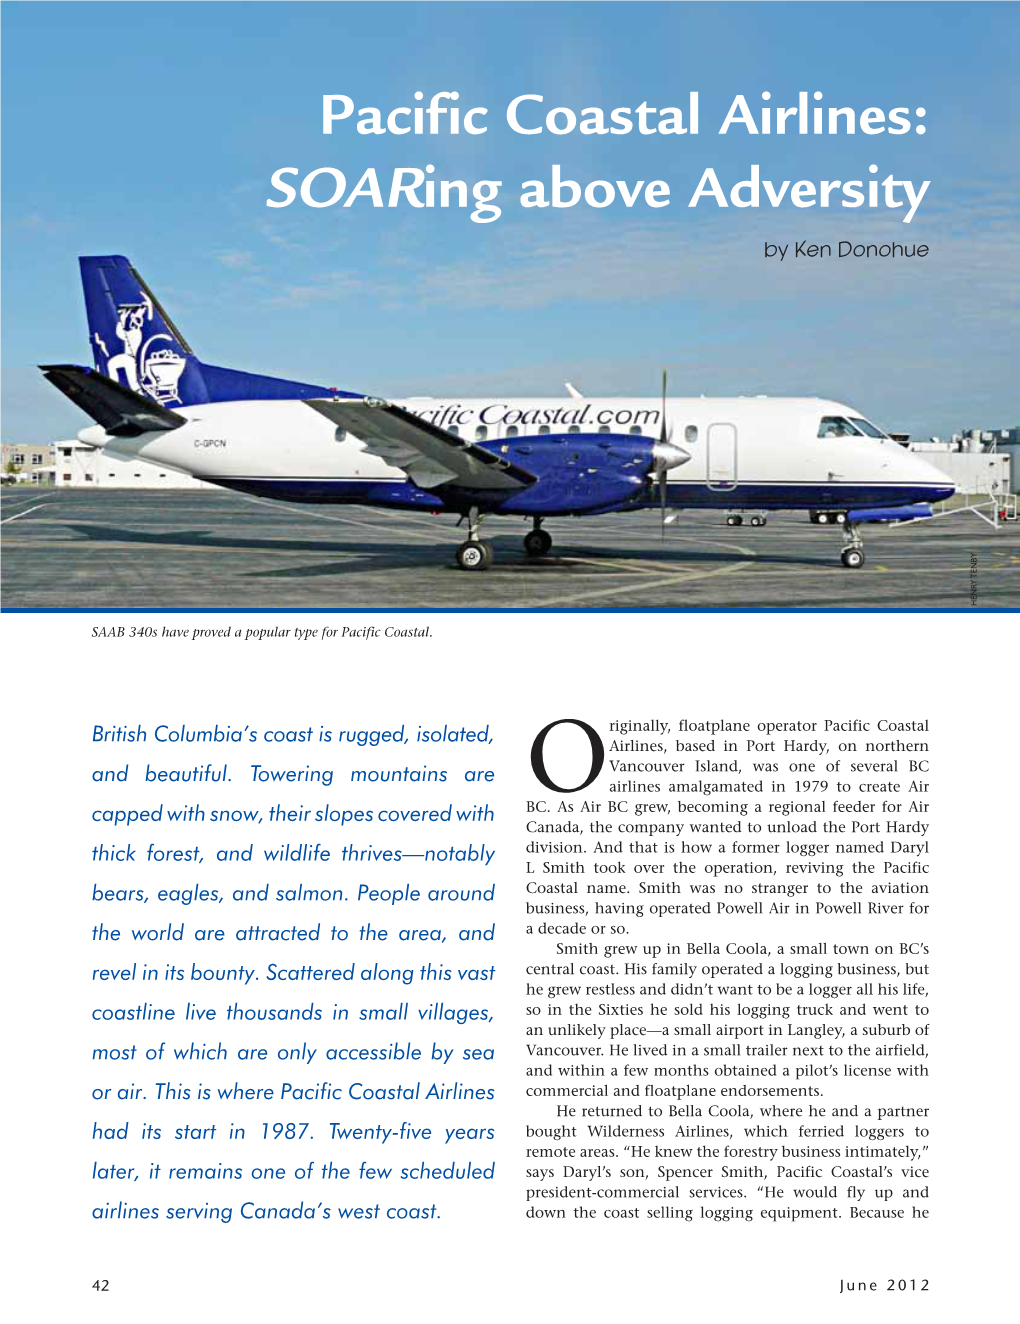 Pacific Coastal Airlines: Soaring Above Adversity by Ken Donohue HENRY TENBY HENRY